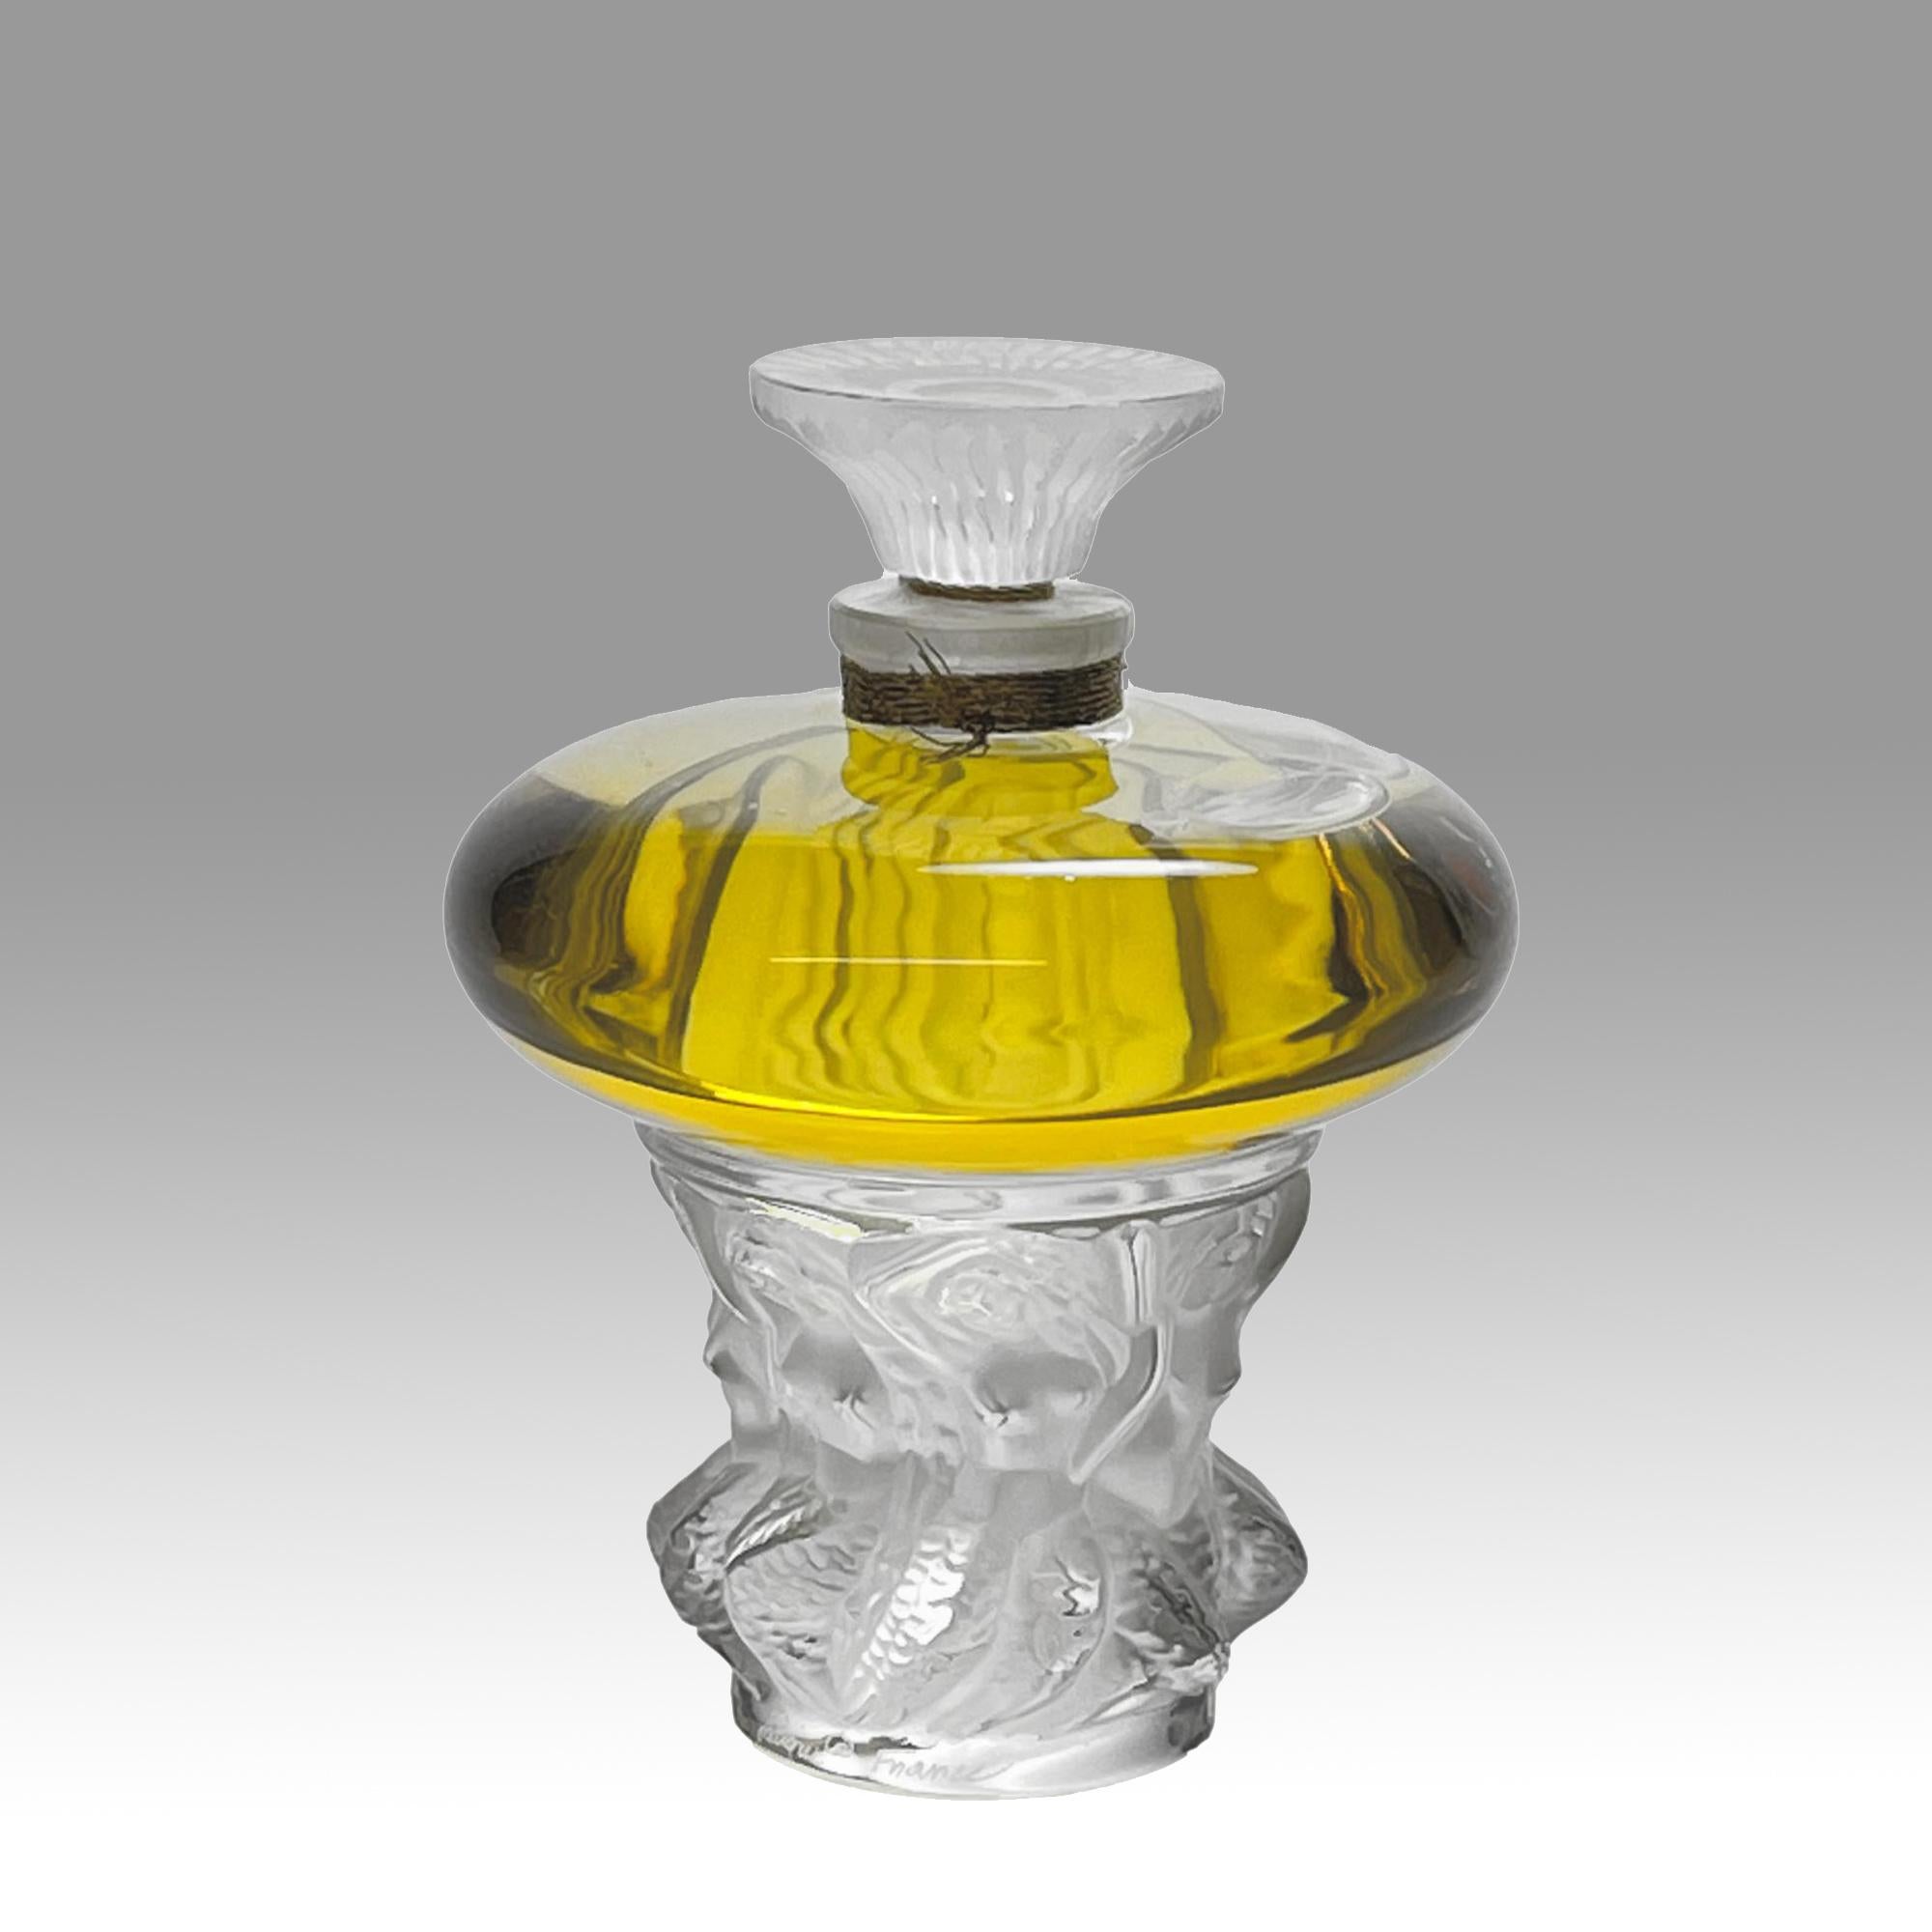 An attractive limited edition clear and frosted glass scent bottle, the clear glass body containing the original Lalique perfume supported by a frosted glass column decorated with dancing sirens around the circumference with fine detail, signed